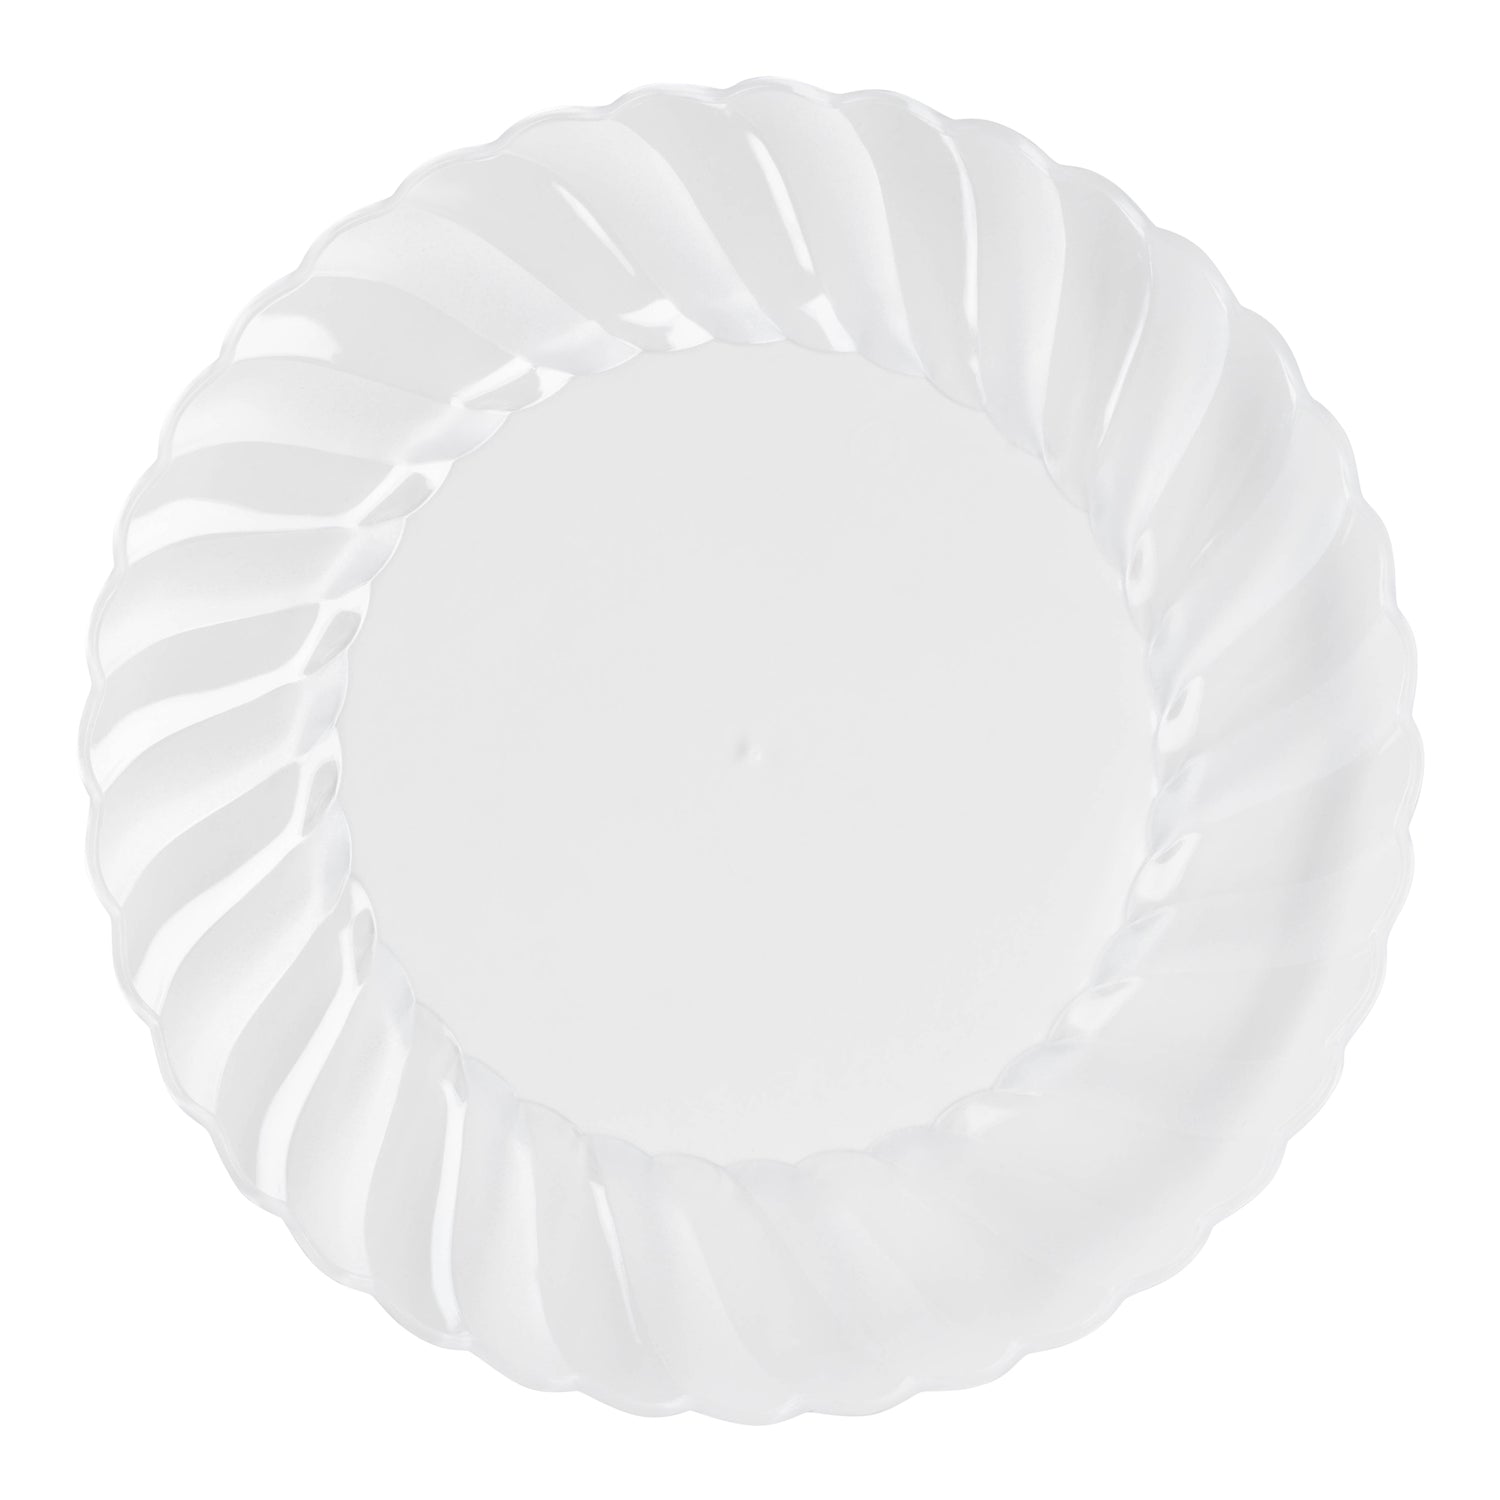 10 Pack Clear Hard Plastic Dinner Plates, Disposable Tableware